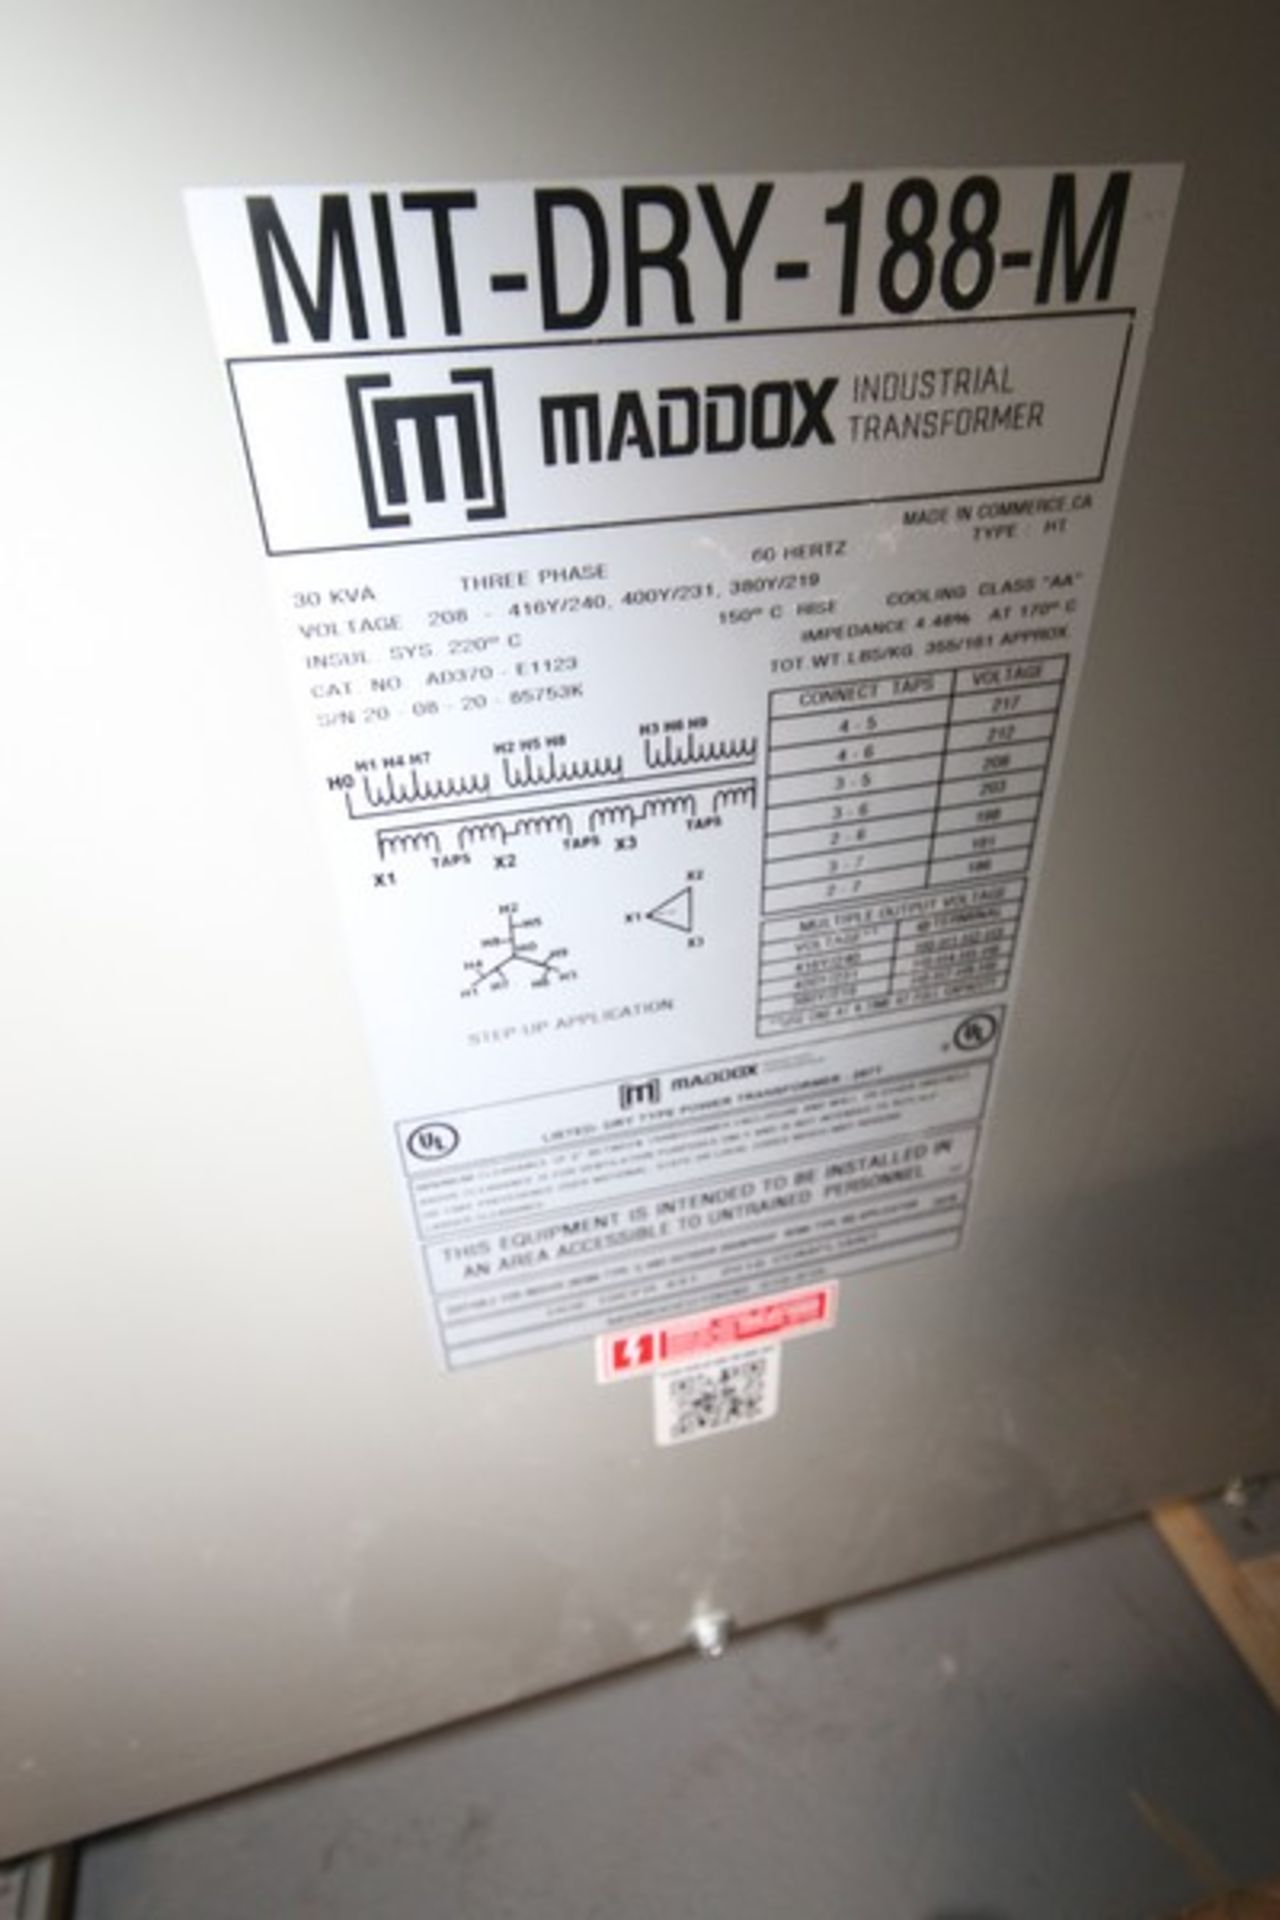 Maddox Transformer, Voltage 208-416 Y/240, 30 KVA, 3 Phase, Cat. No.: AD37-E1123, S/N 20-08- - Image 2 of 2